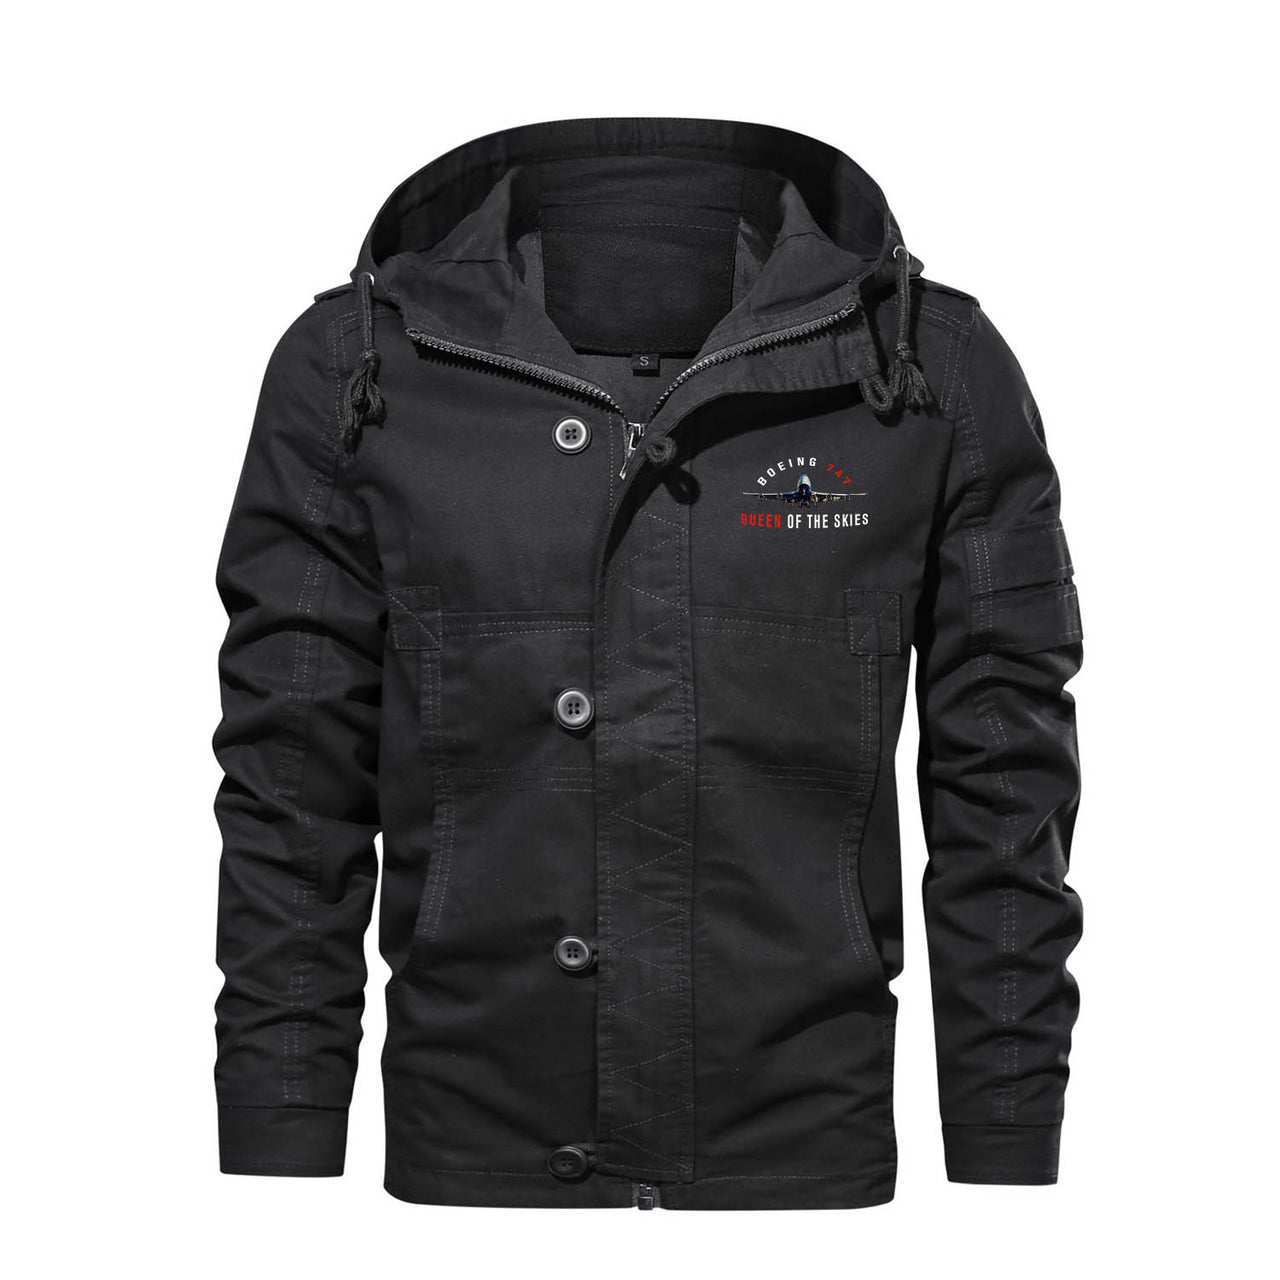 Boeing 747 Queen of the Skies Designed Cotton Jackets